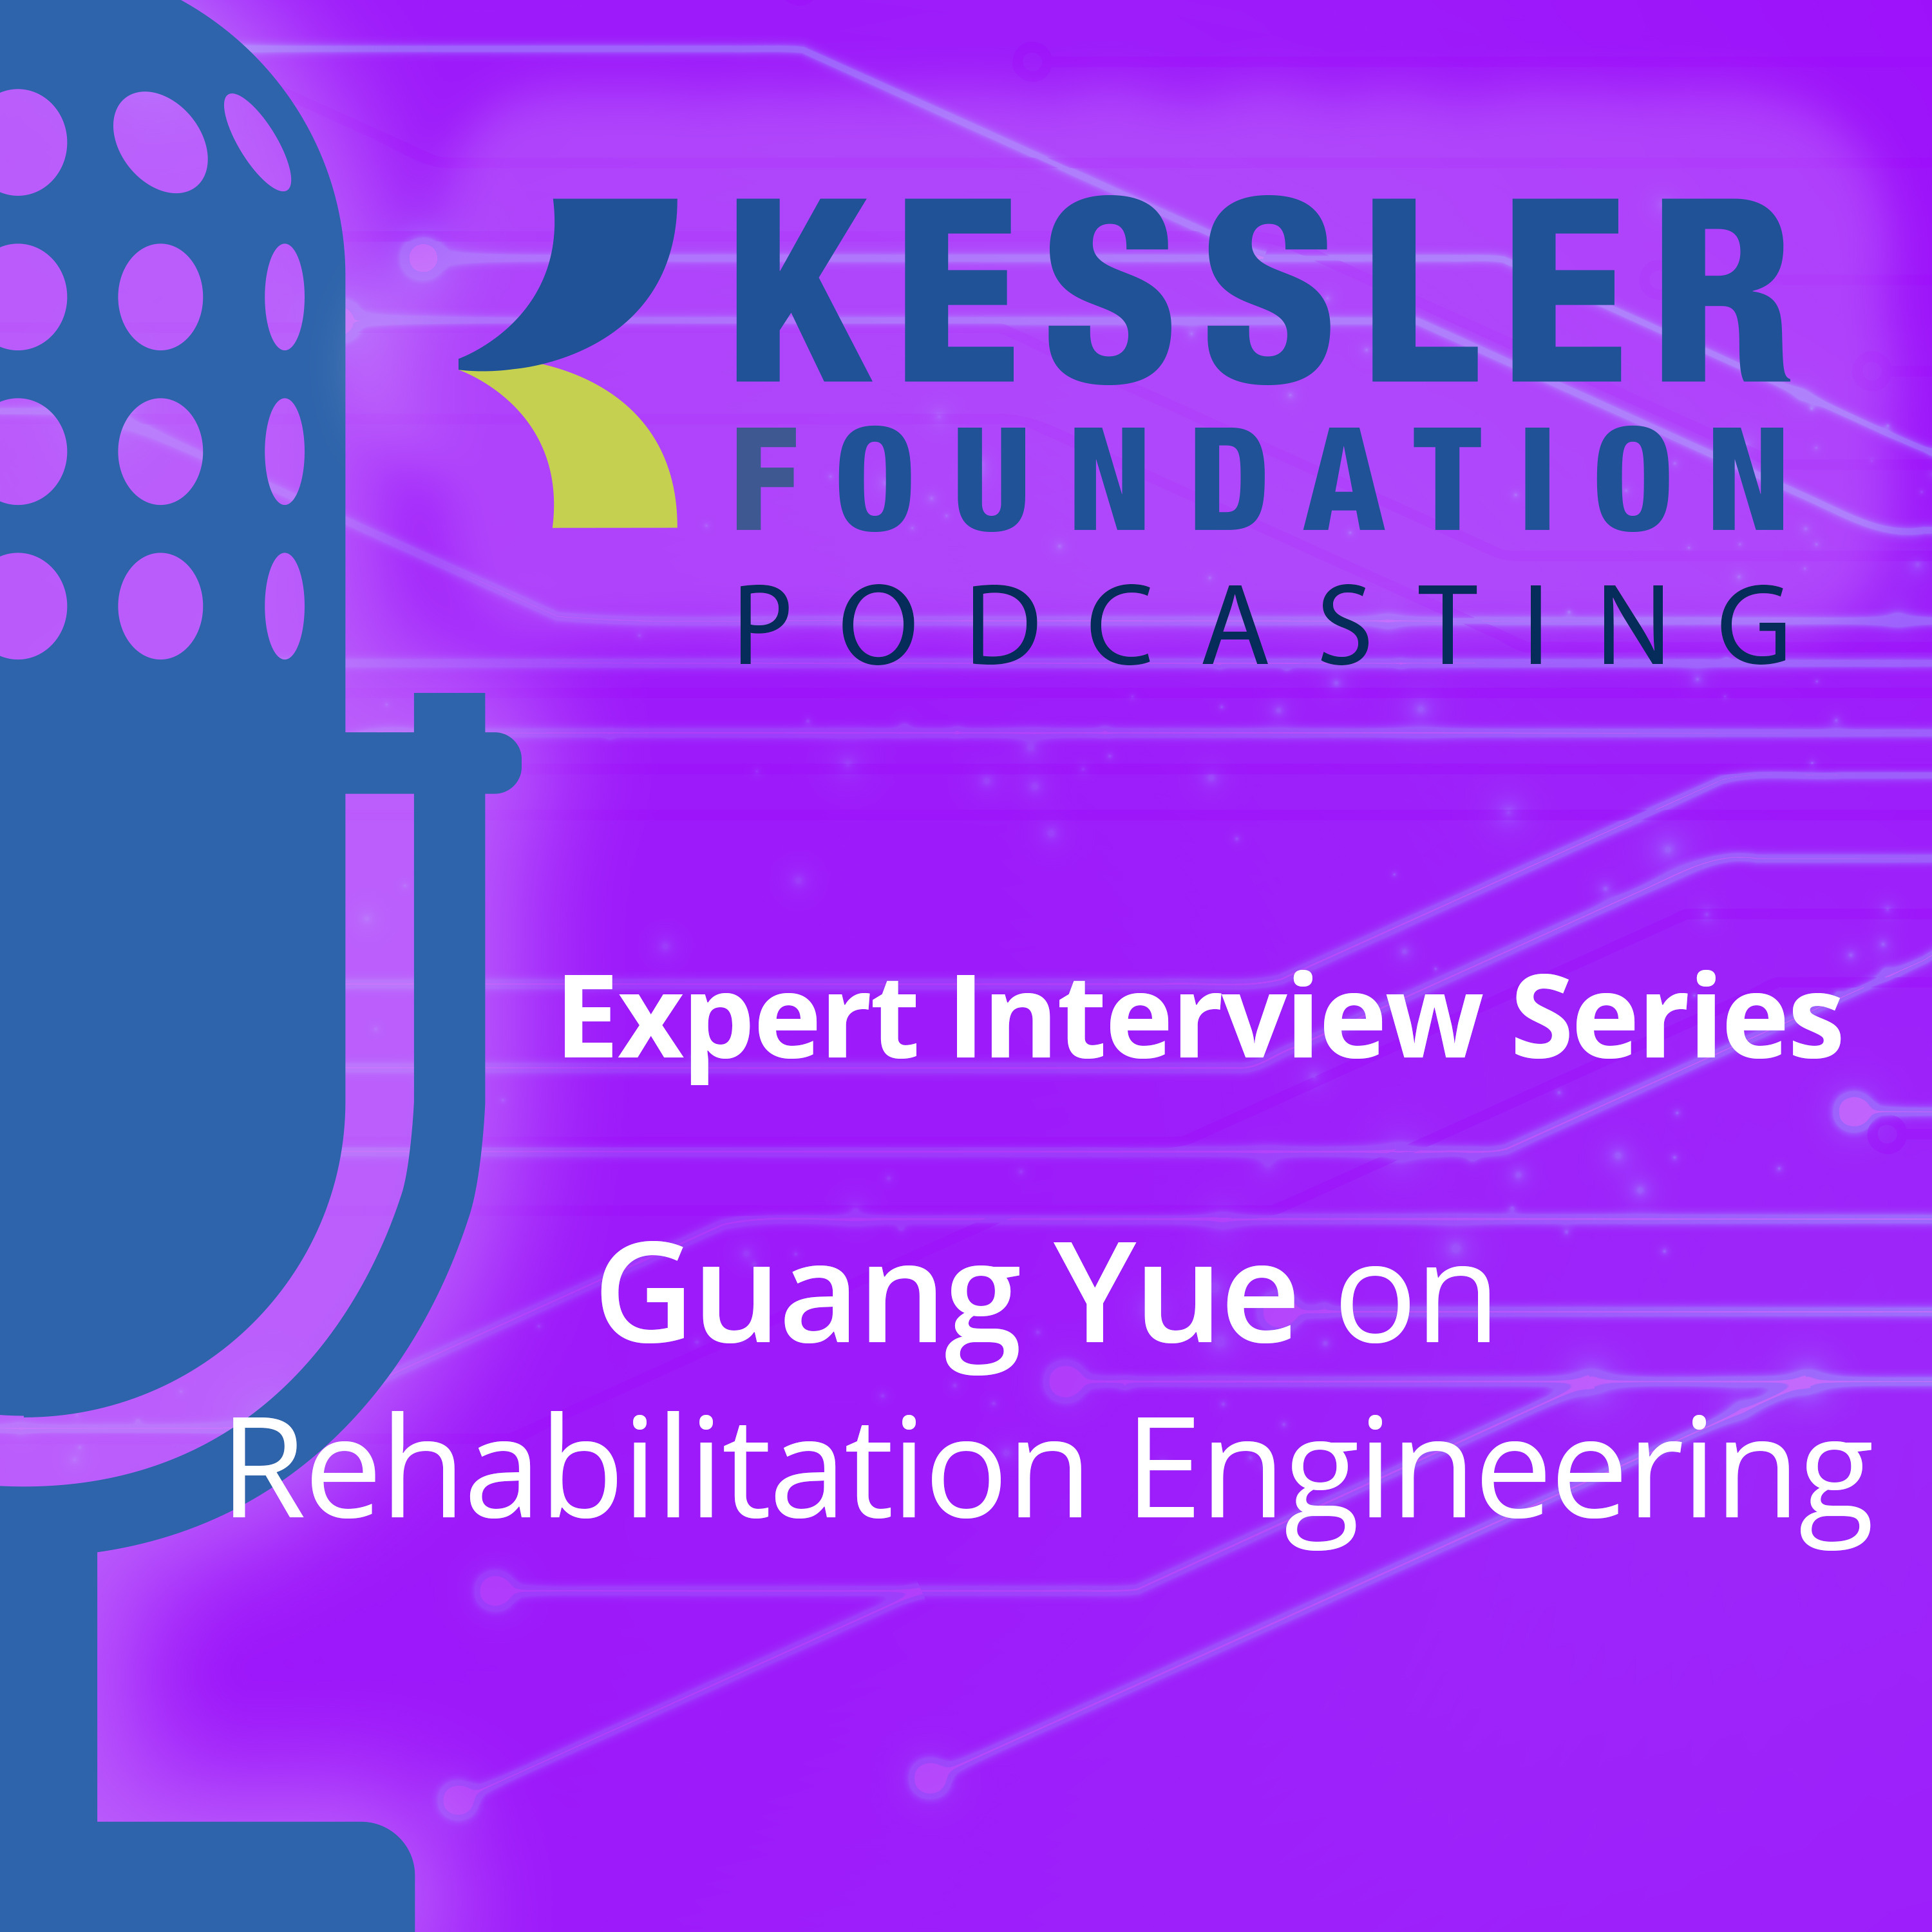 Guang Yue on Rehabilitation Engineering – Expert Interview Series